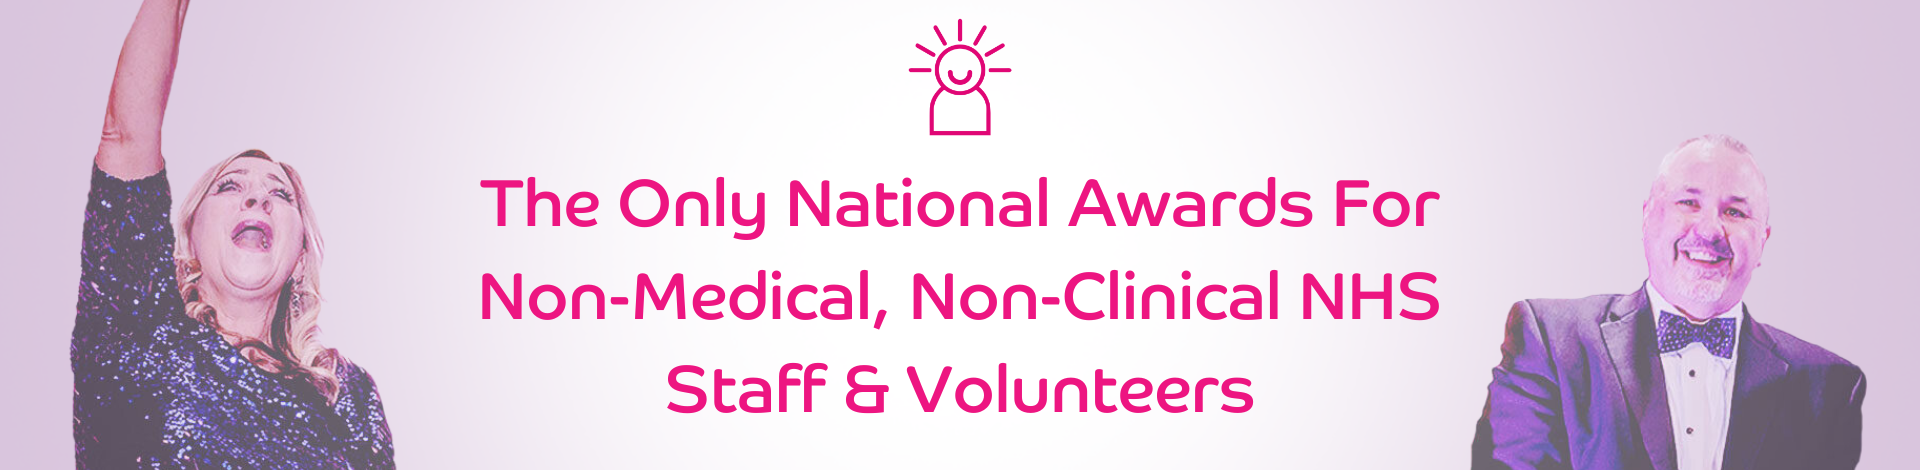 Your National Awards For Non-medical NHS Unsung Heroes